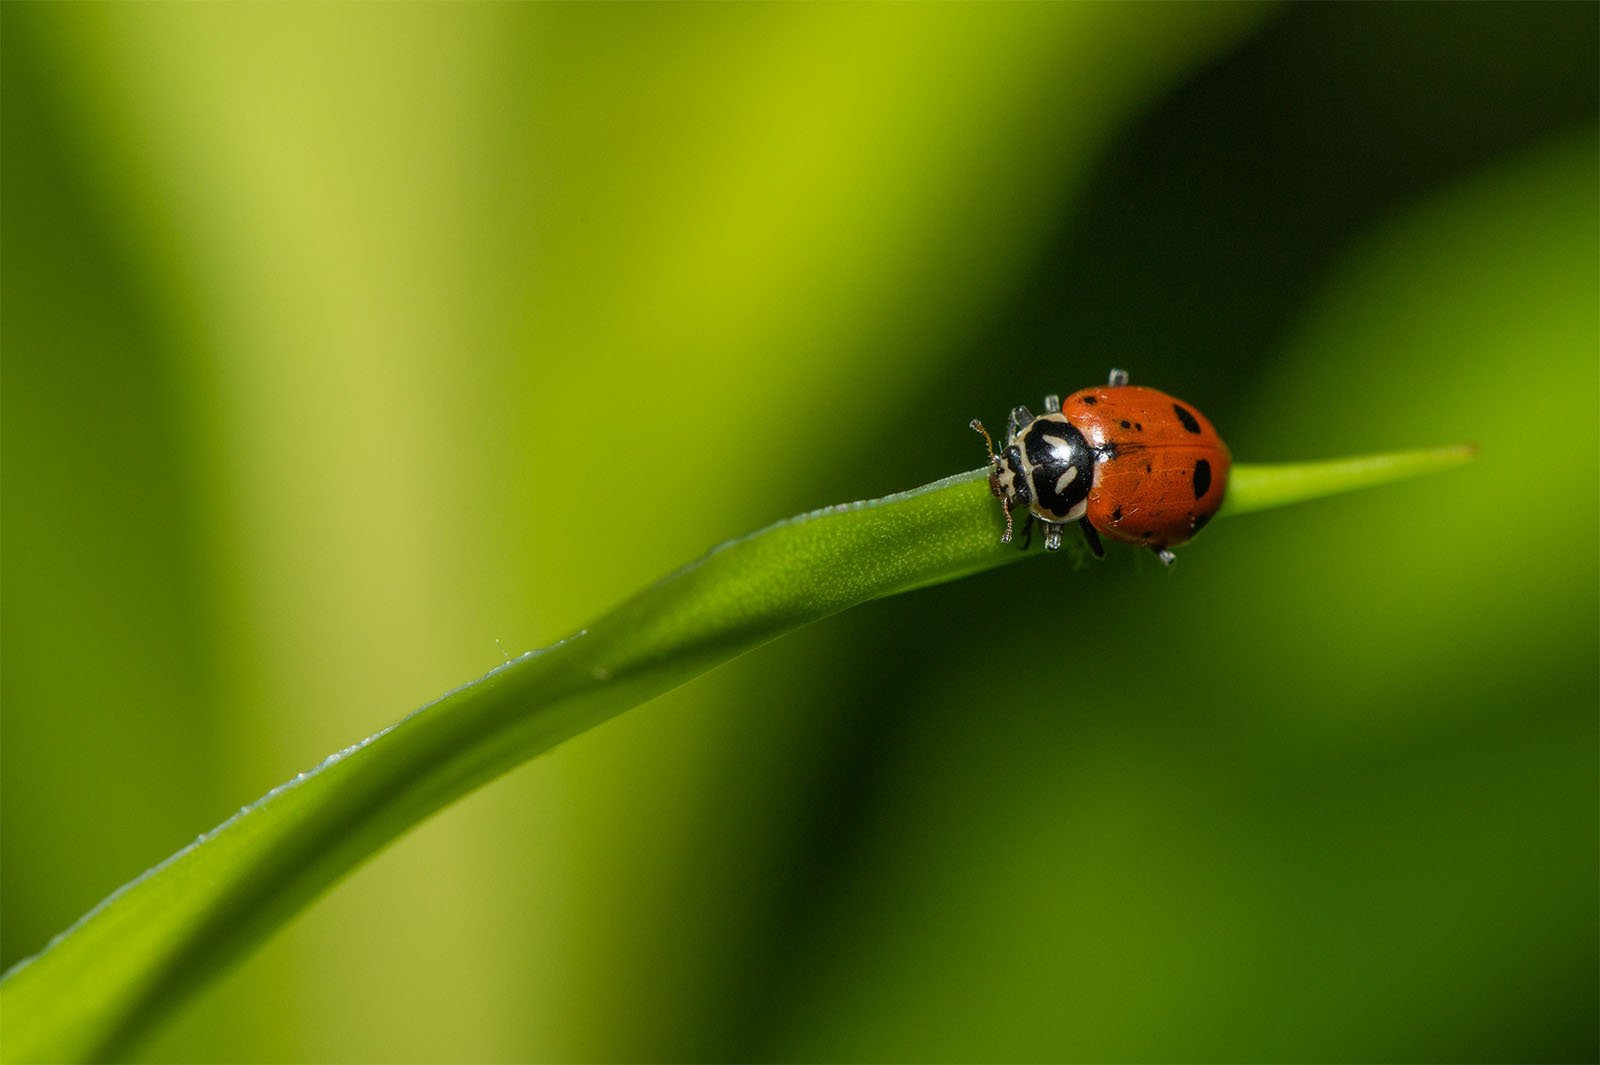 A bright red ladybug with black spots crawls along the tip of a vibrant green leaf against a soft-focused green background.